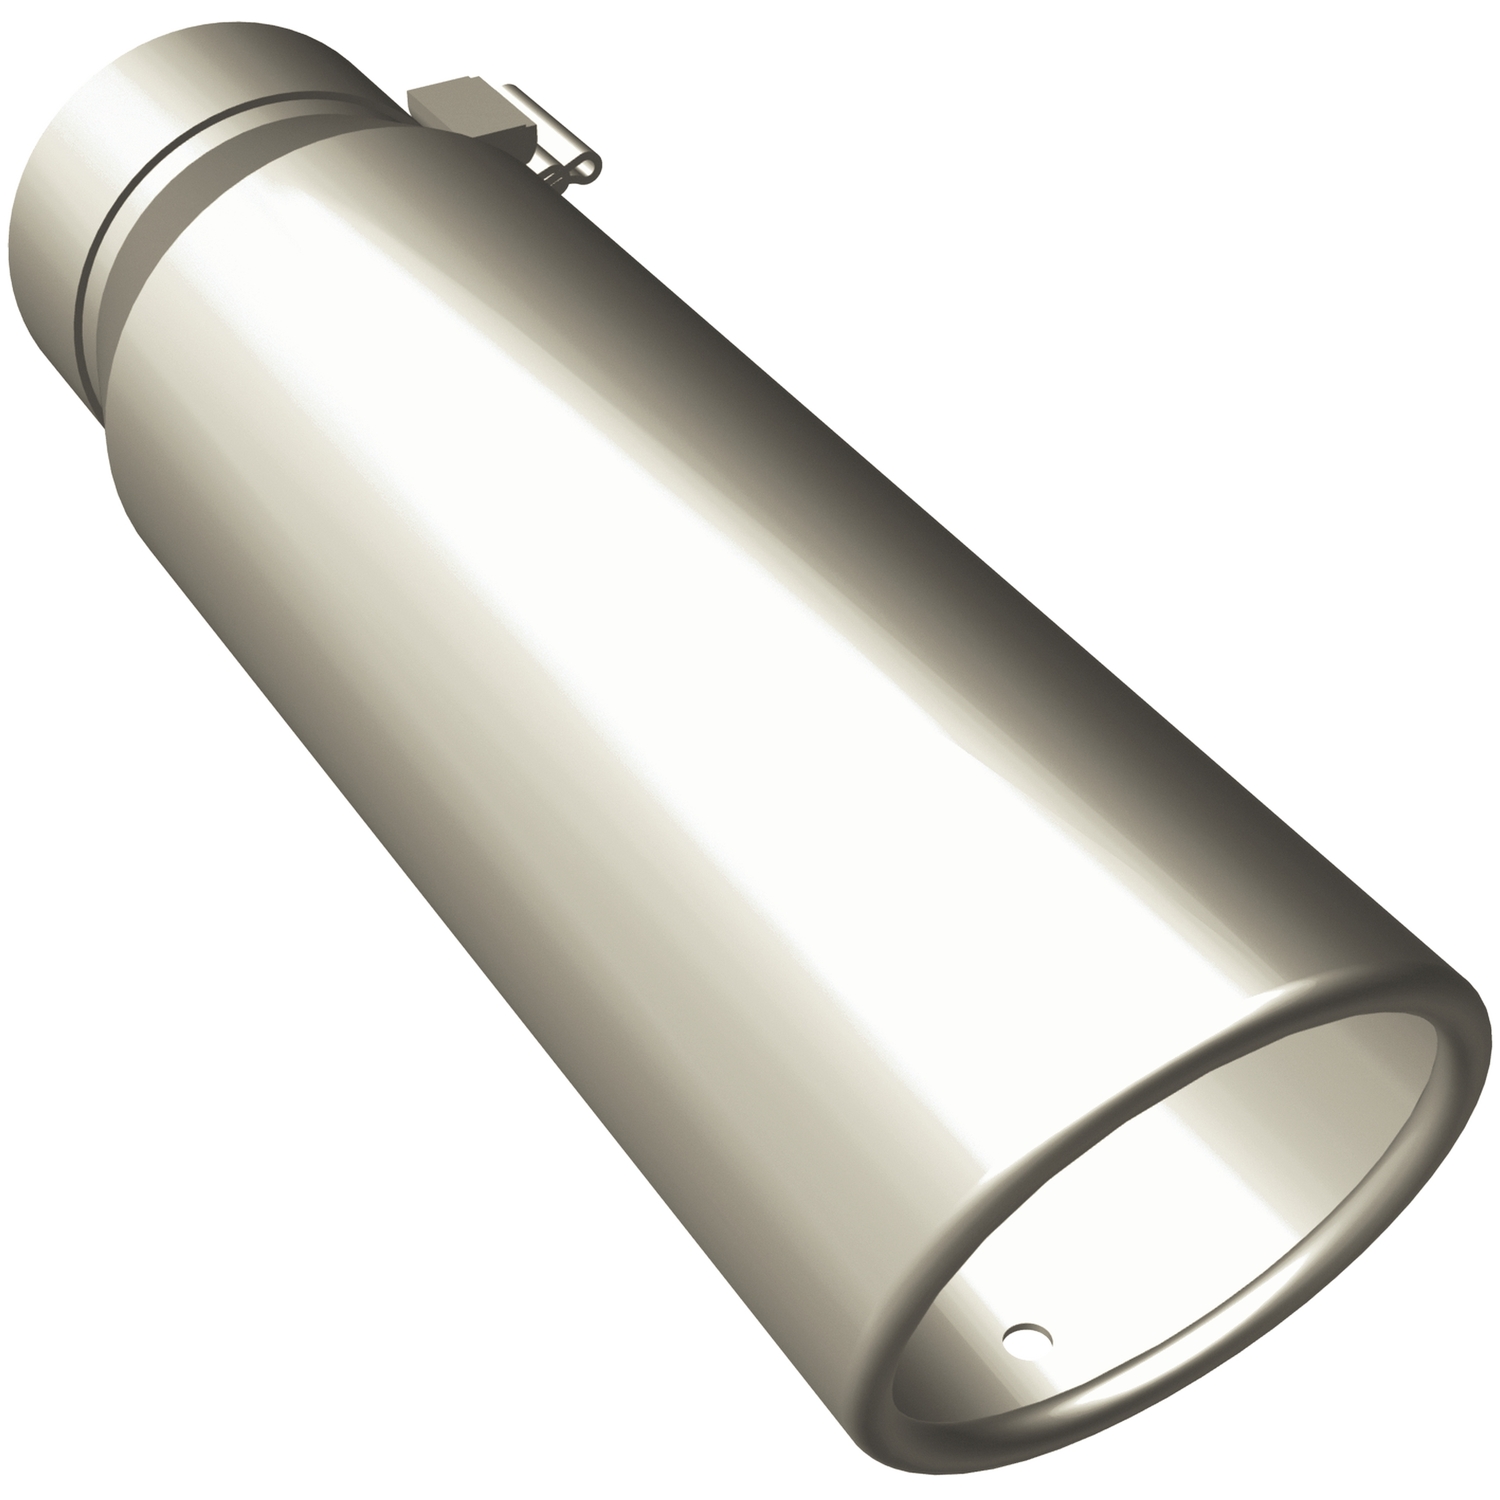 Polished Stainless Steel Clamp-On Single Exhaust Tip Inlet Inside Diameter: 2.75"